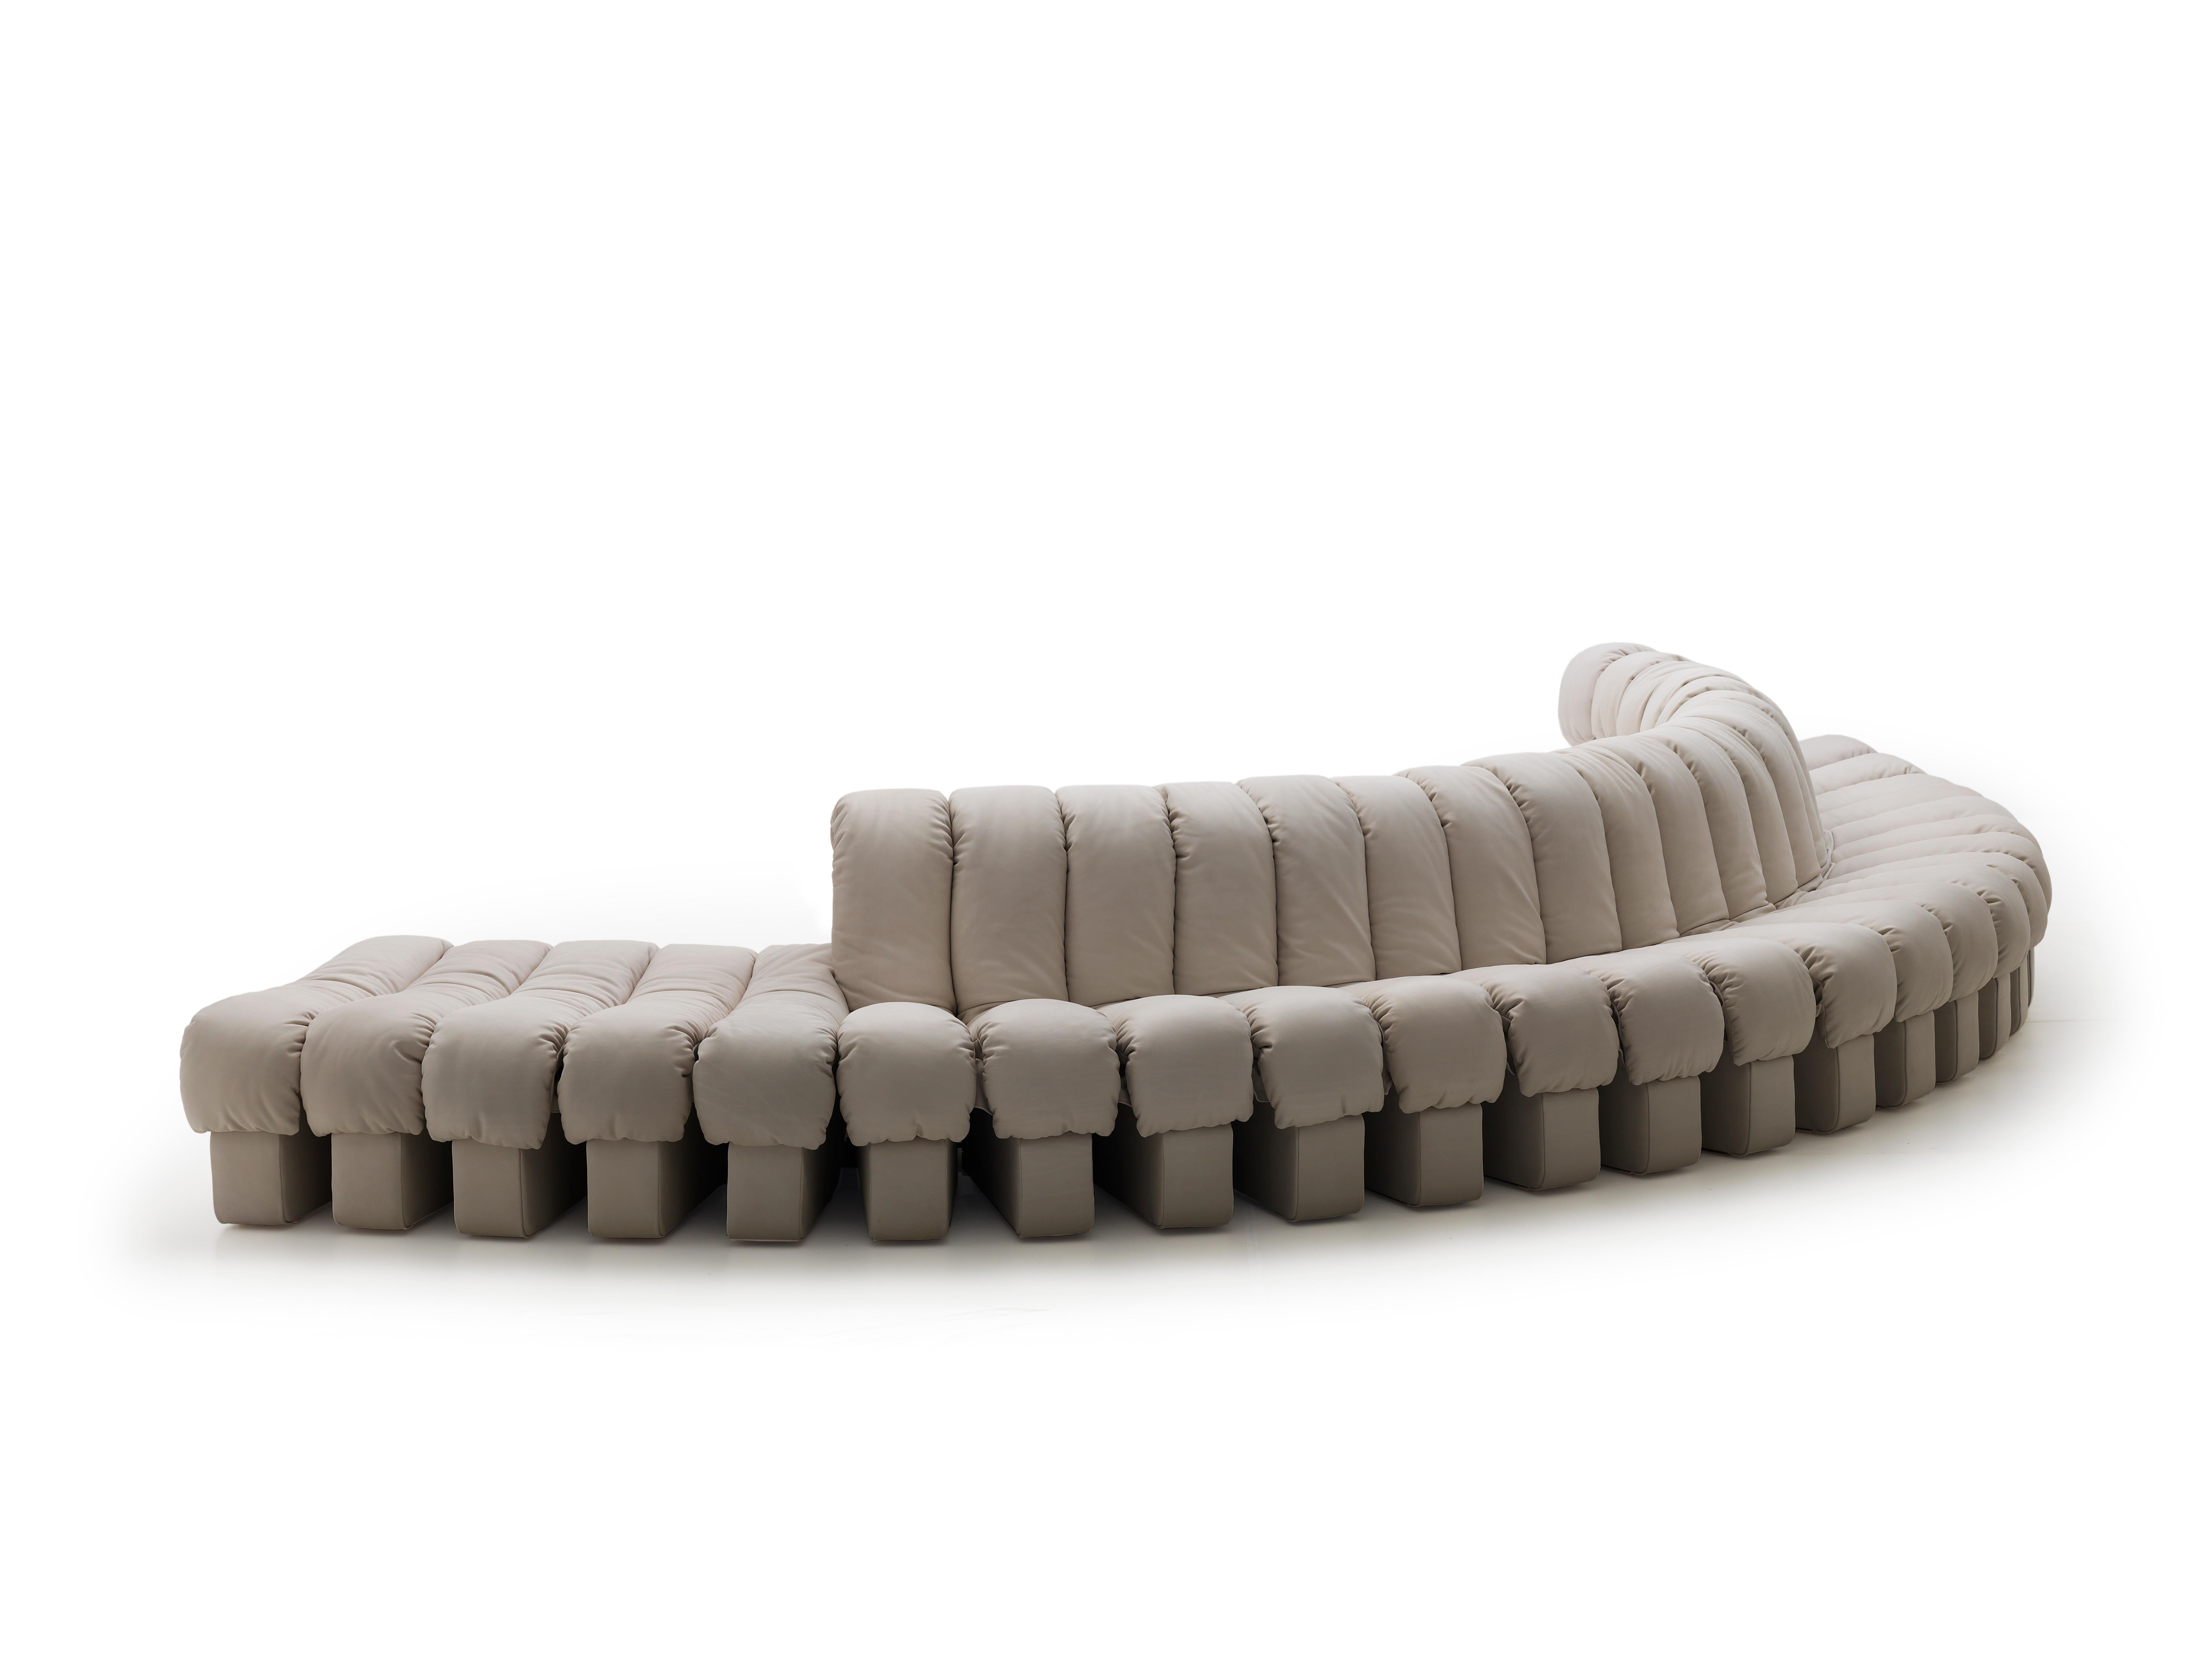 De Sede DS 600 'Snake' Sectional Sofa with 25 Elements in High Quality Full-grain Nappa Leather, Zwitserland. New, current production. 

The De Sede DS 600 alias 'Tatzelwurm' or 'Snake' is arguably the most famous sofa in the world. The non-stop